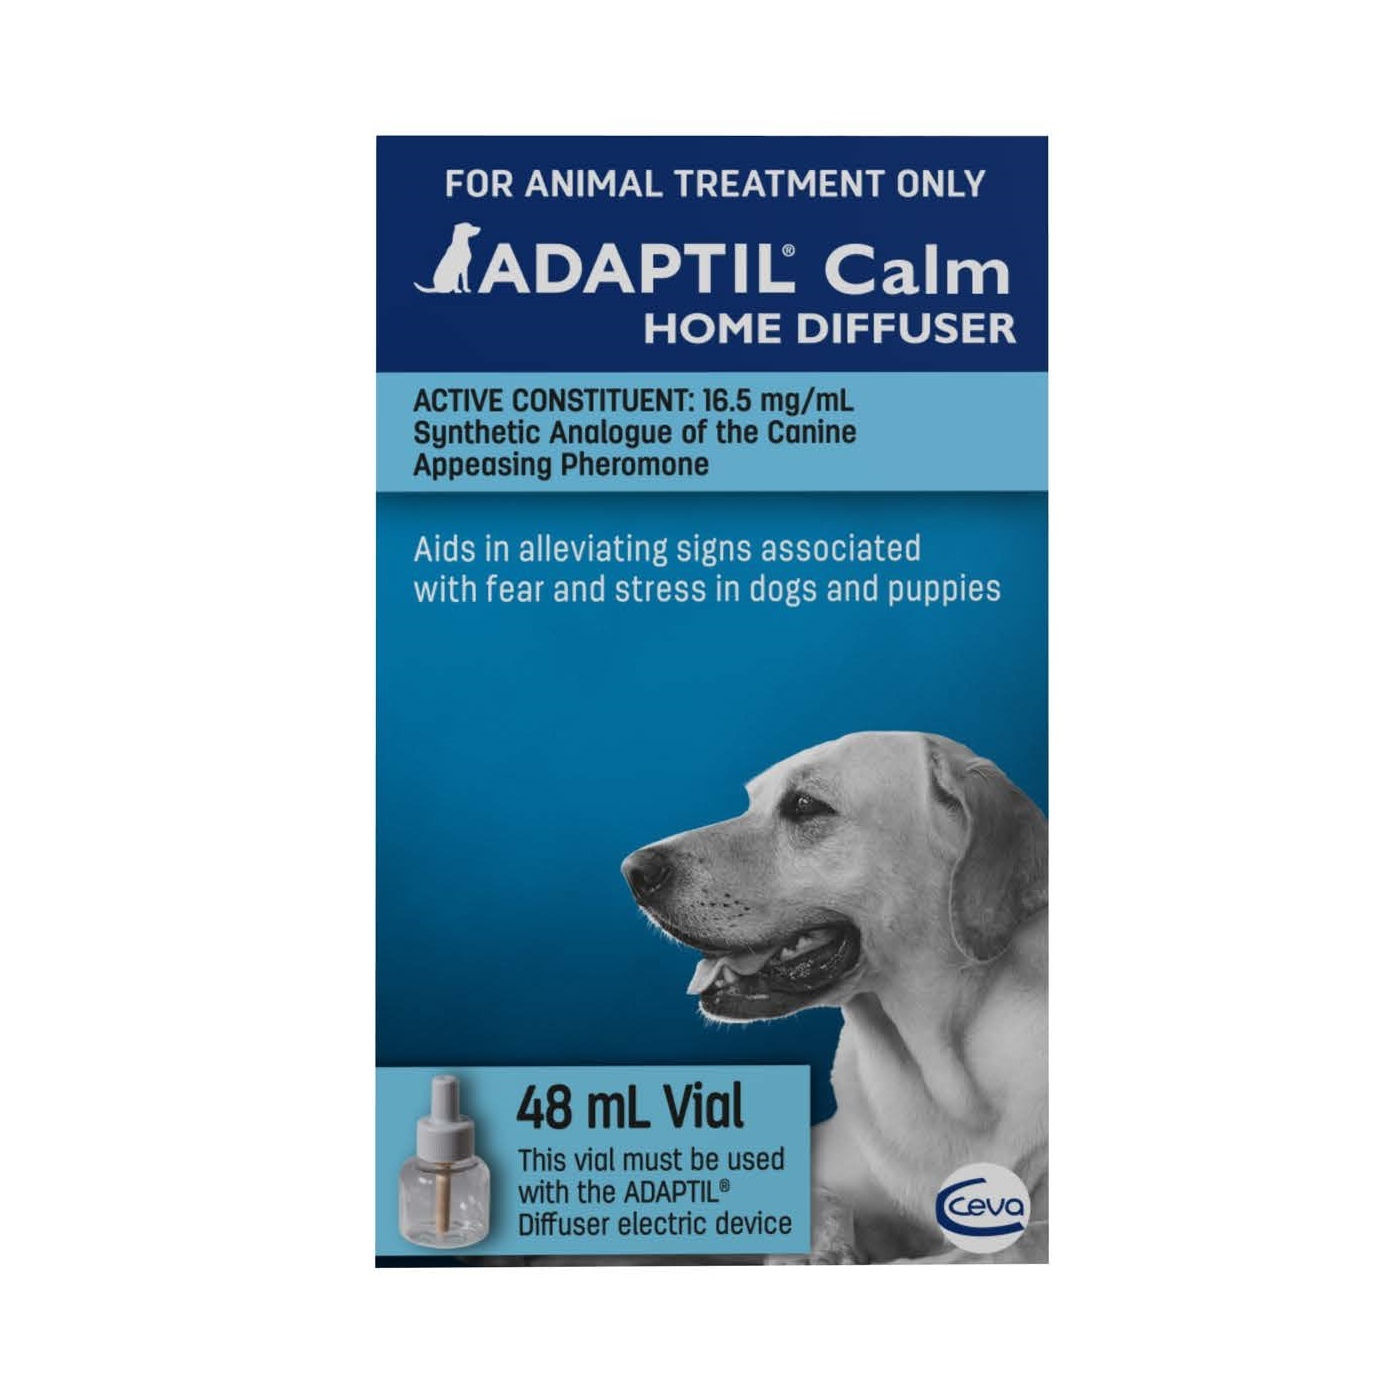 Adaptil Calm Home Diffuser Refill - Pheromones for Anxious Dogs - Refill Bottle 48ml image 1